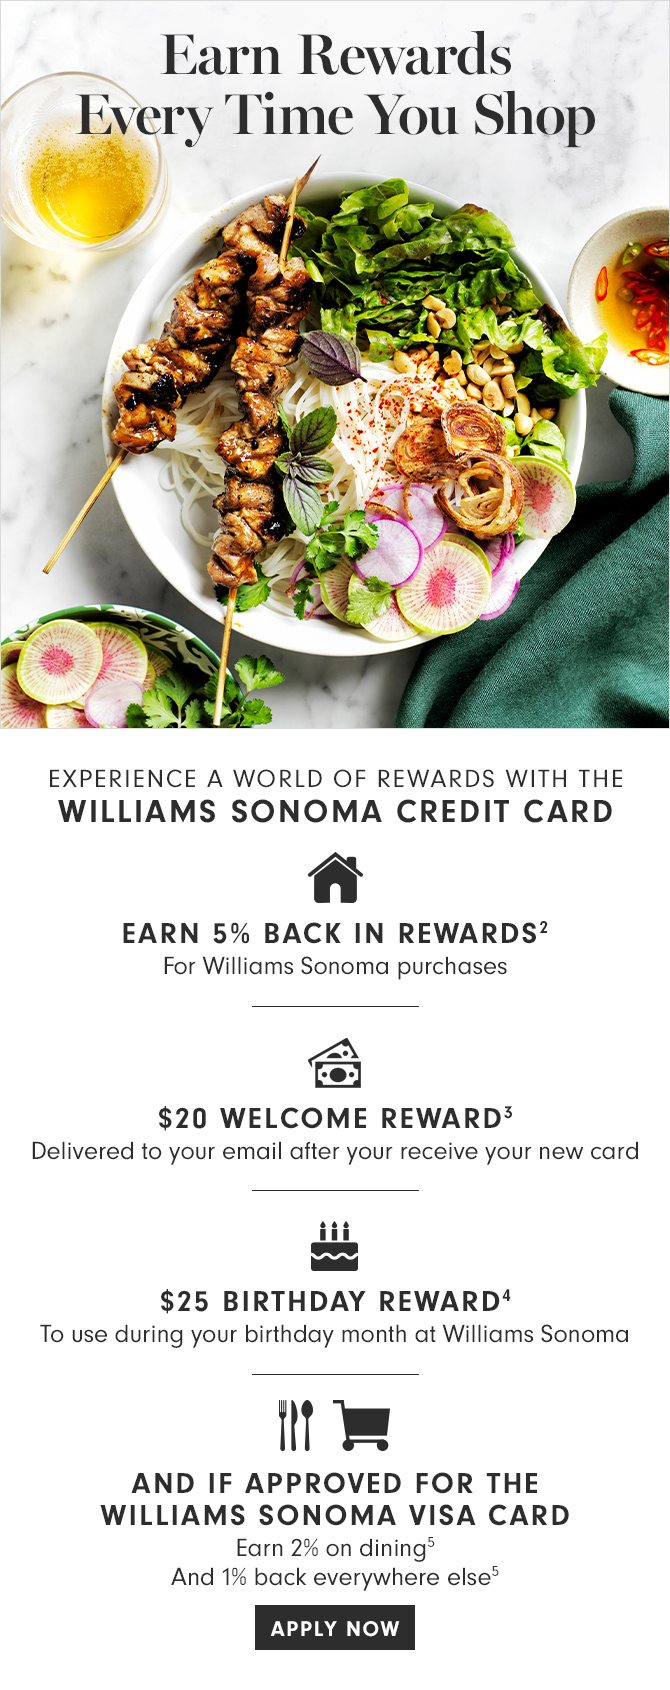 Earn Rewards Every Time You Shop - EXPERIENCE A WORLD OF REWARDS WITH THE WILLIAMS SONOMA CREDIT CARD - EARN 5% BACK IN REWARDS(2) - $20 WELCOME REWARD(3) - $25 BIRTHDAY REWARD(4) - AND IF APPROVED FOR THE WILLIAMS SONOMA VISA CARD - Earn 2% on dining(5) And 1% back everywhere else(5) APPLY NOW